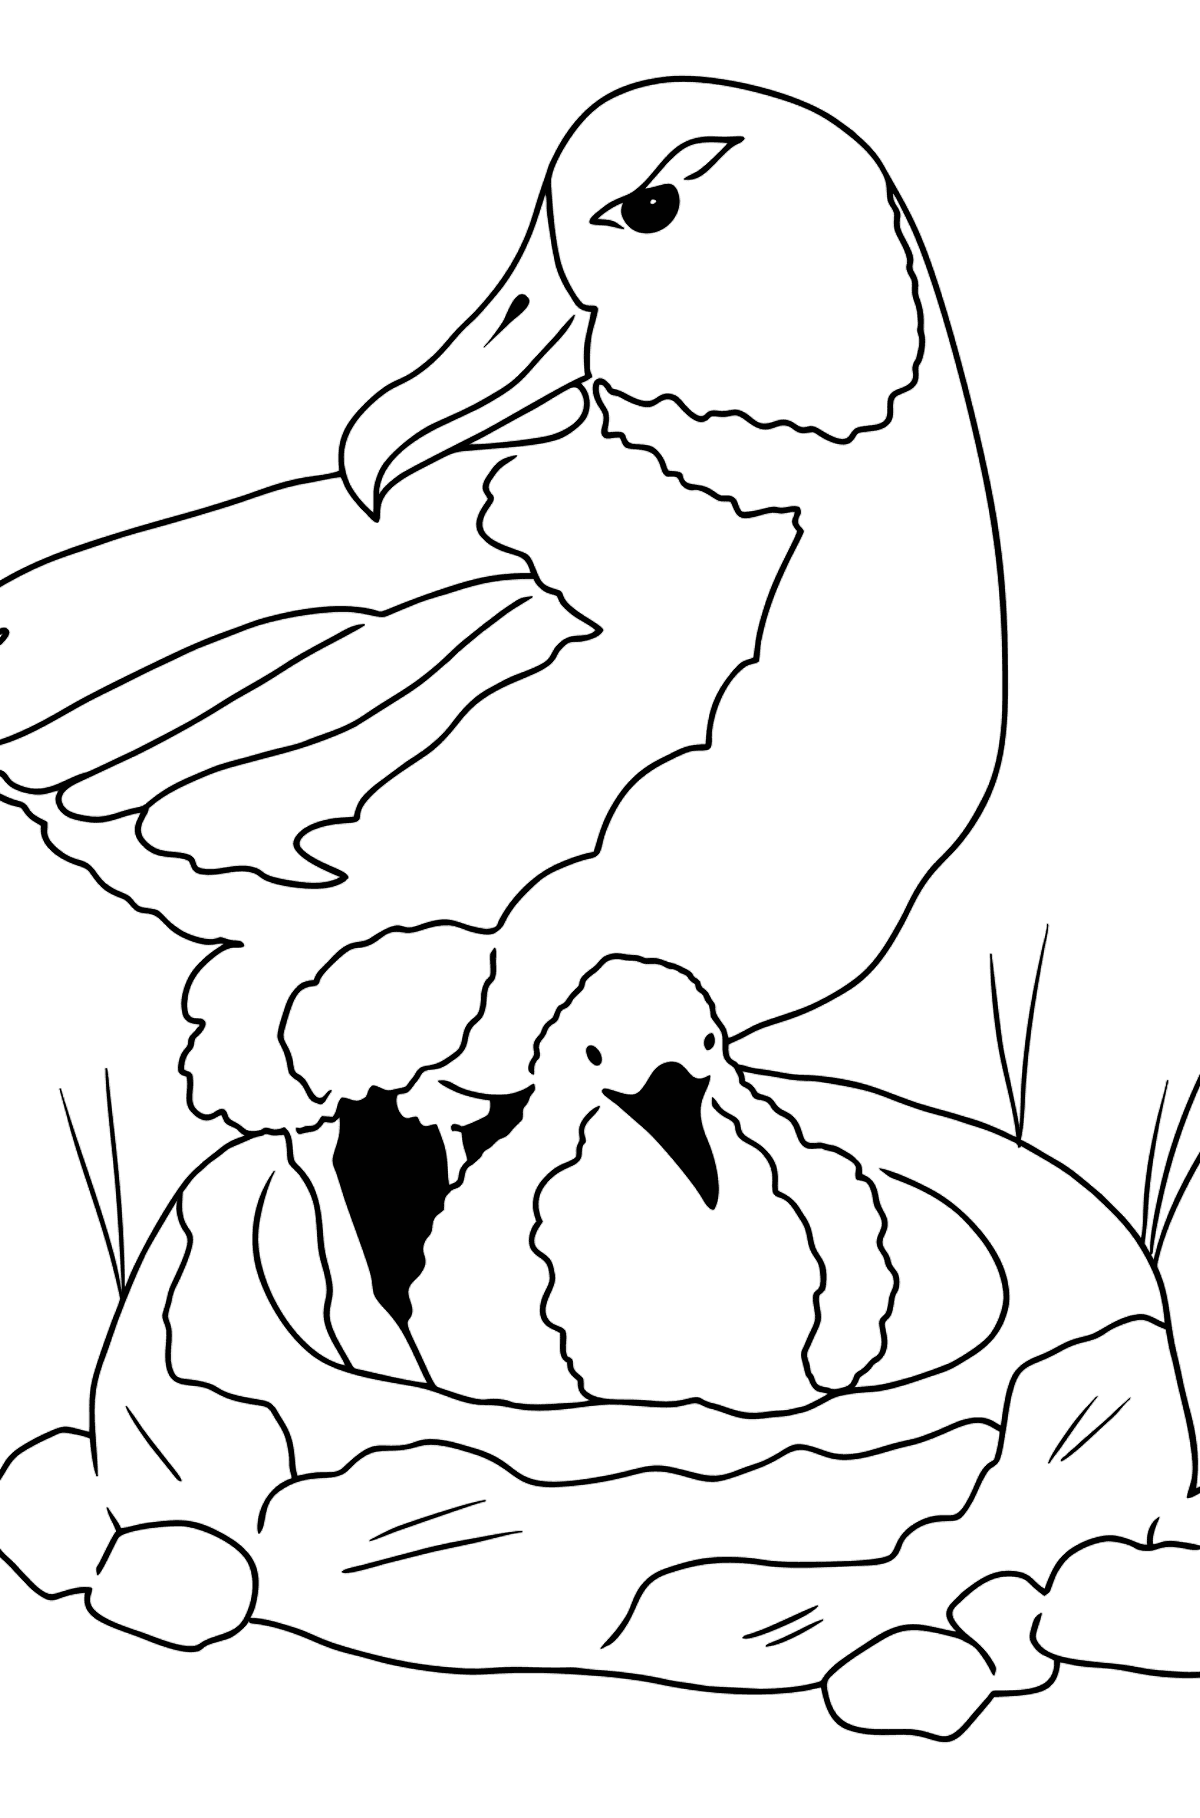 Coloring Page with An Albatross ♥ Free Online